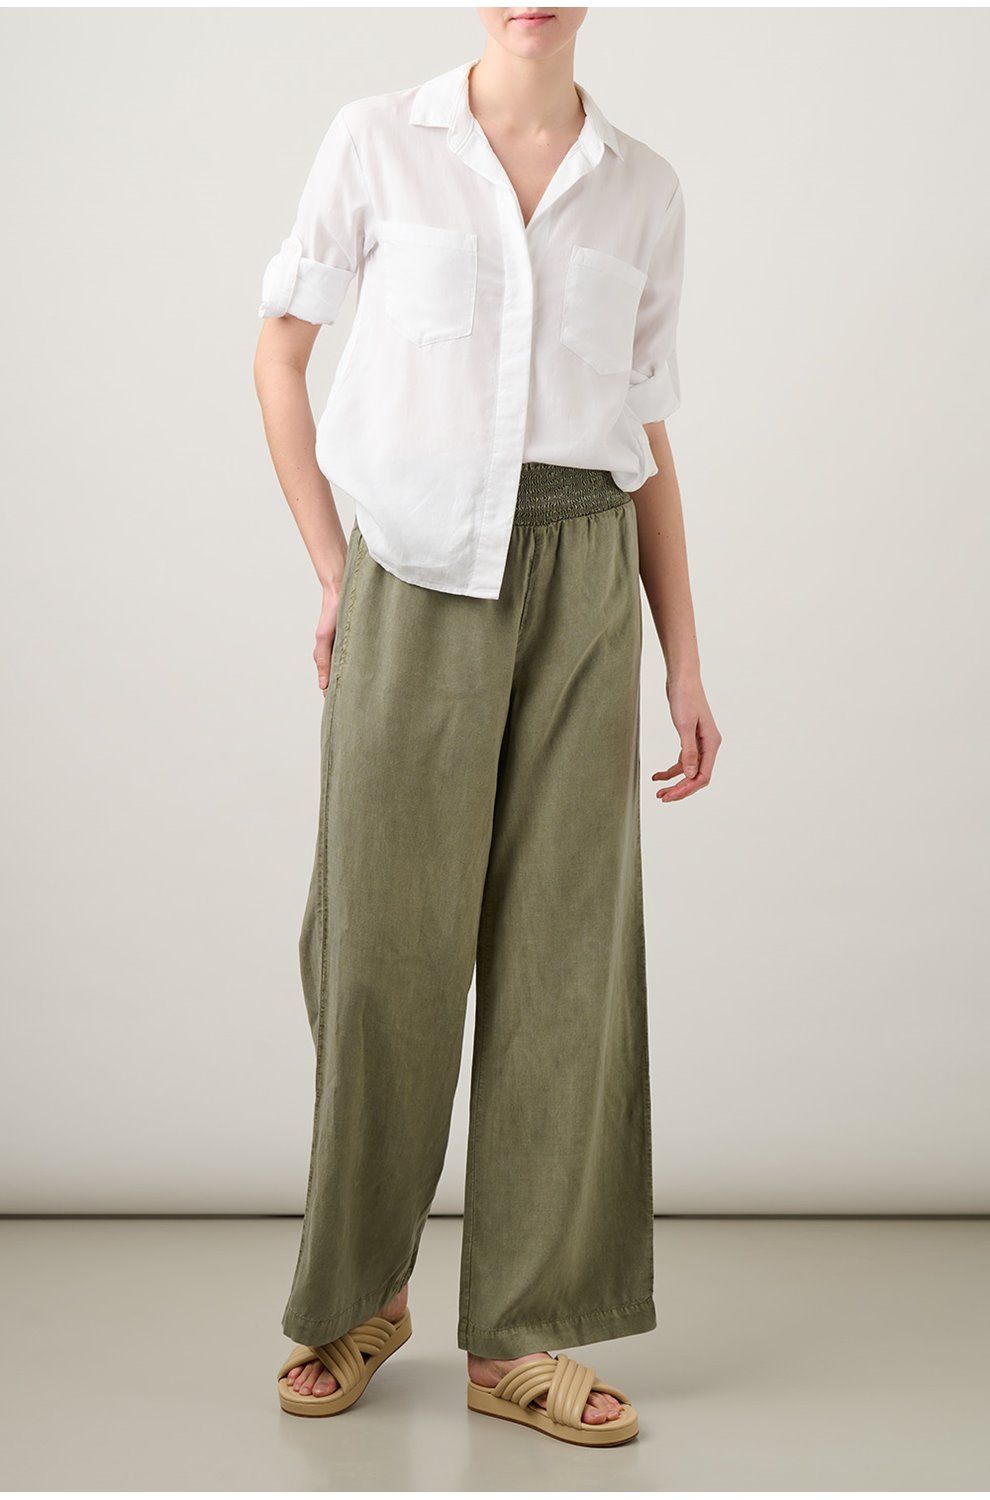 Trilogy Stores | Smocked Waist Wide Leg Pant in Soft Army